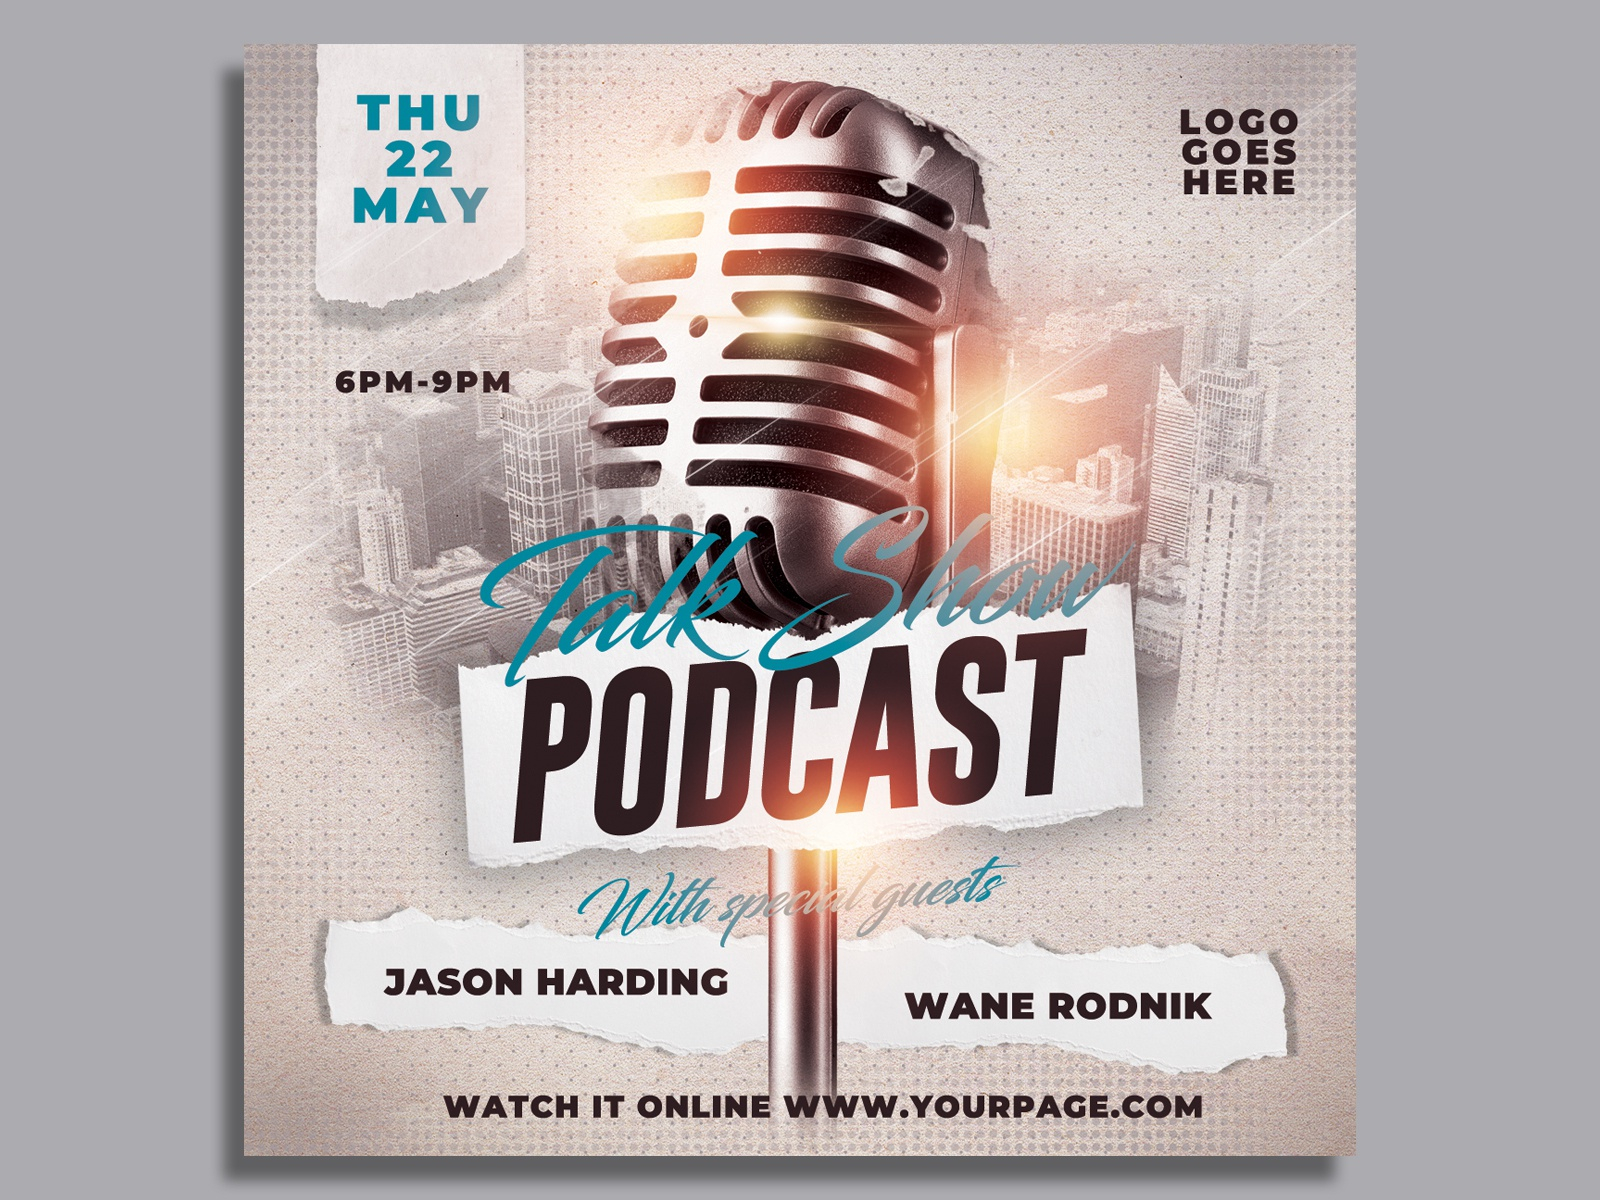 Podcast Talk Show Flyer Template by Hotpin on Dribbble Pertaining To Radio Show Flyer Template With Regard To Radio Show Flyer Template